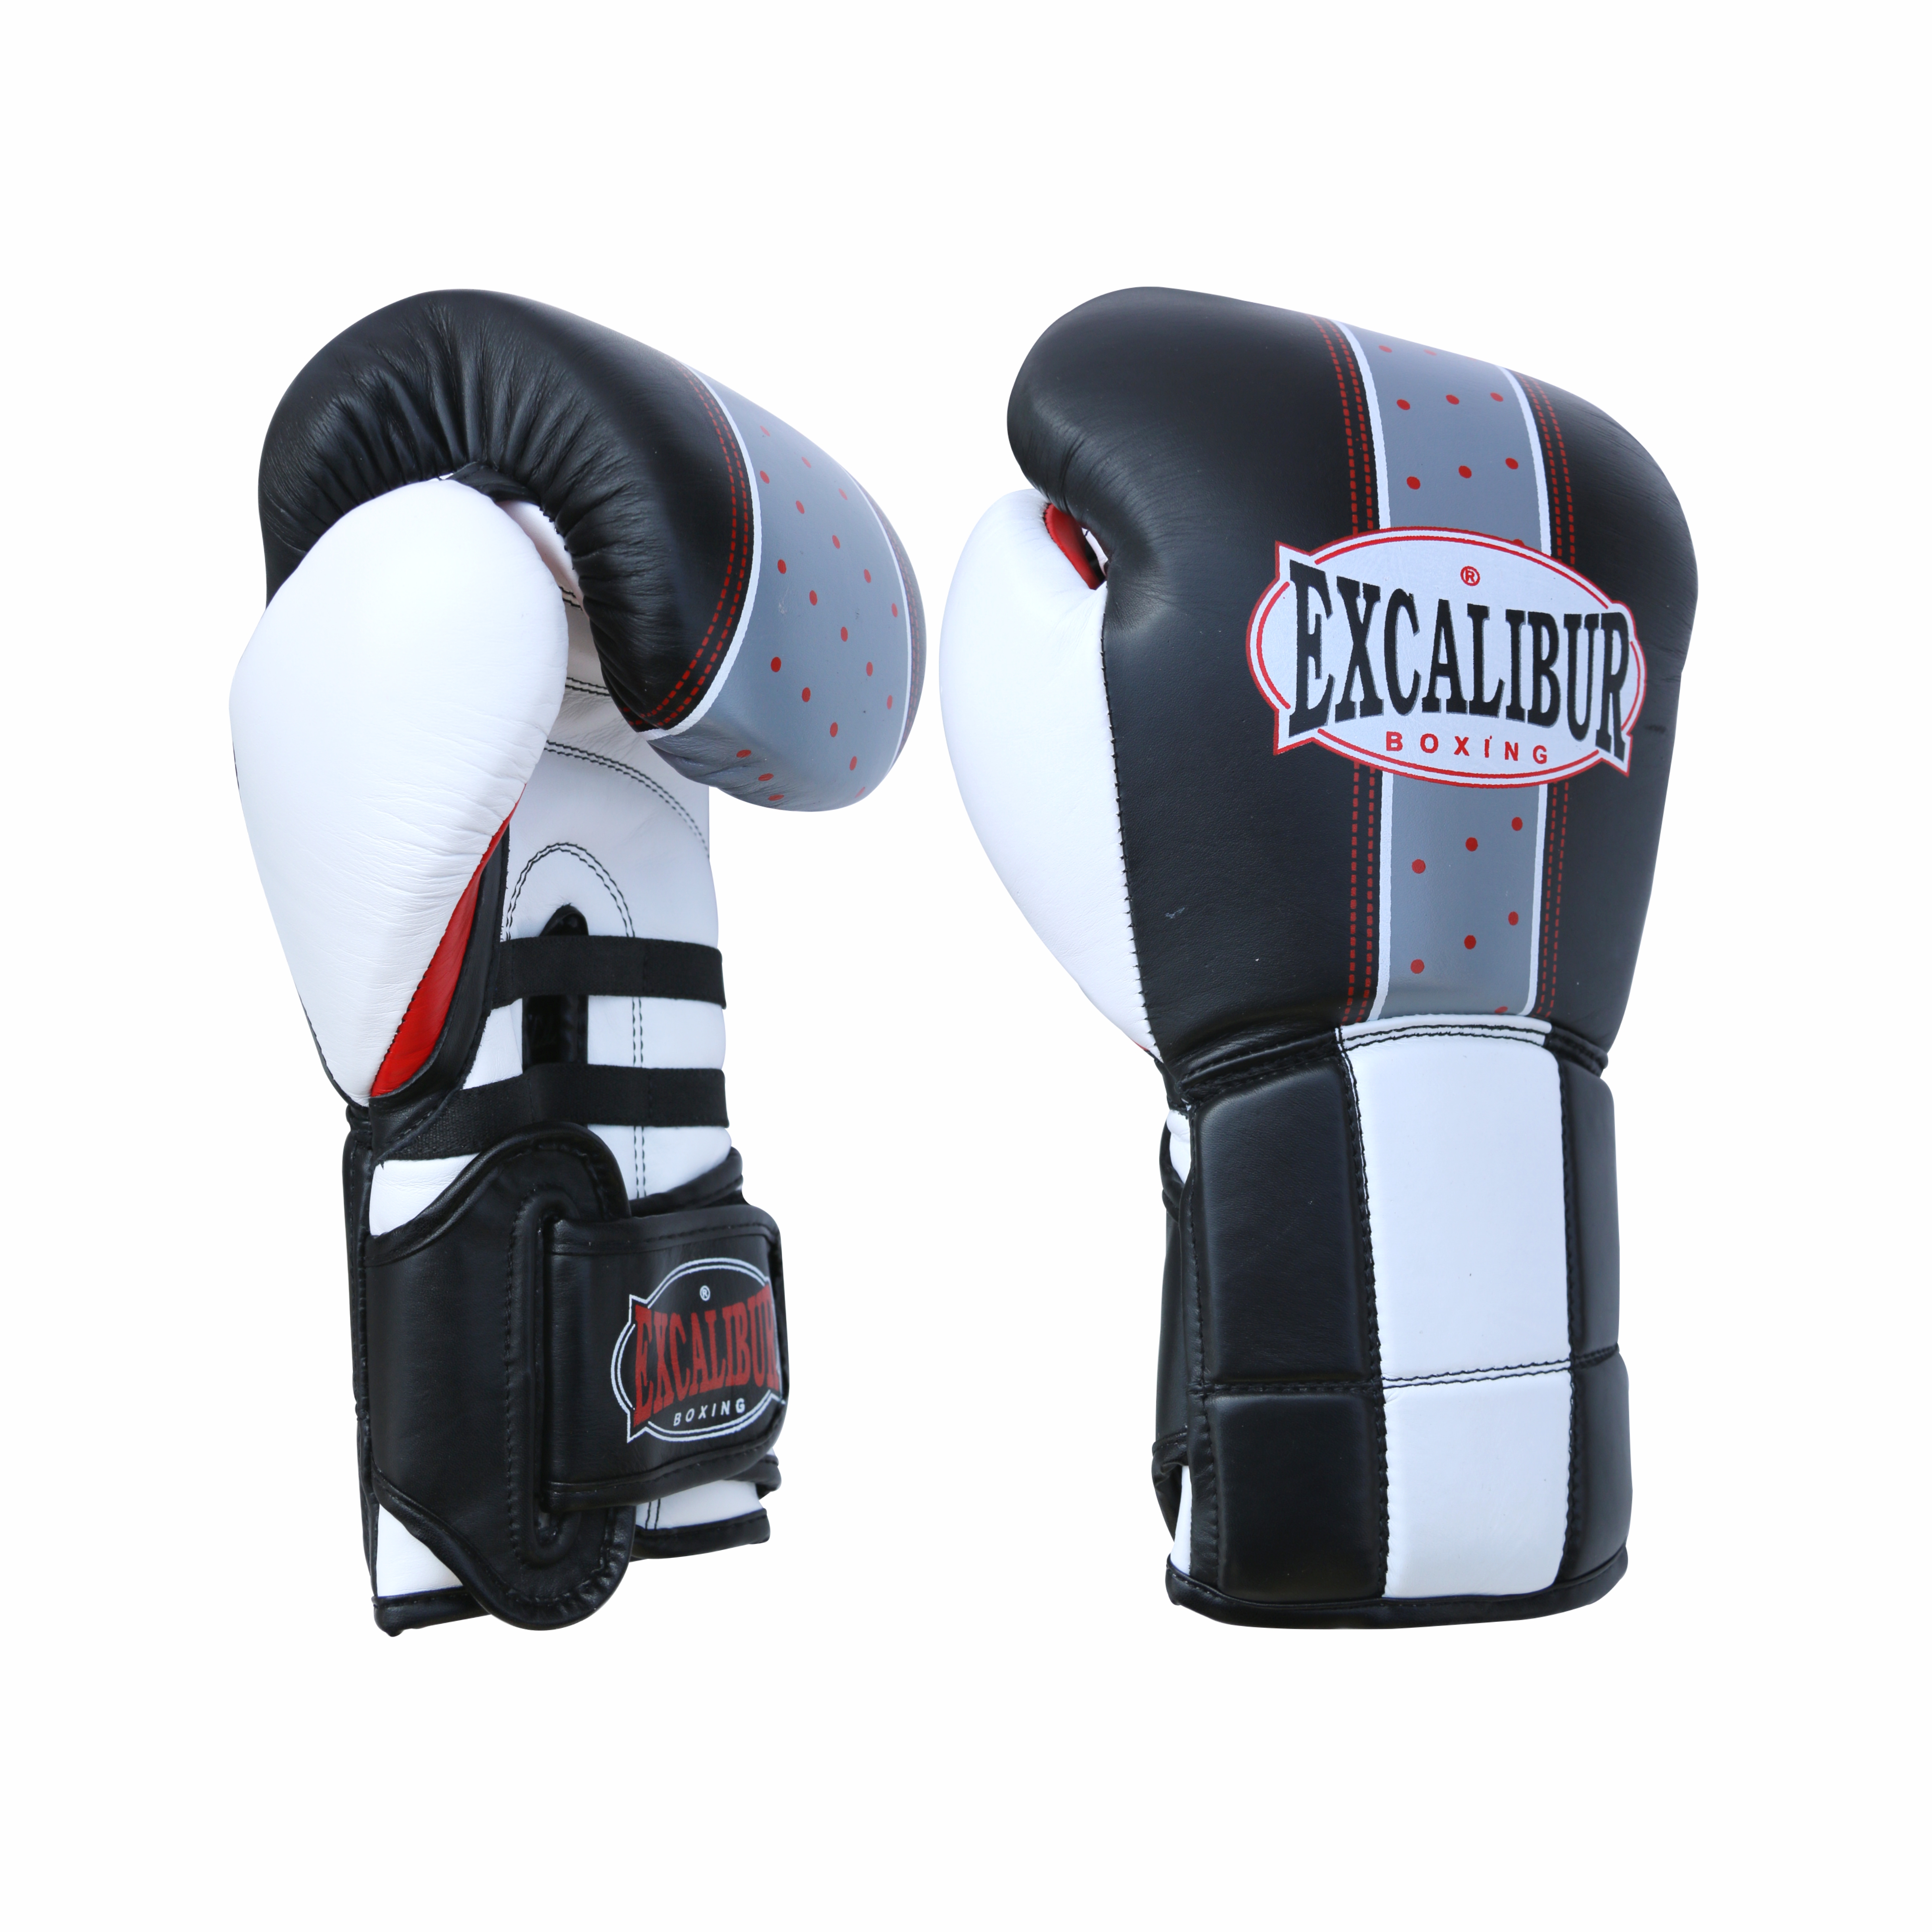 Sultan Boxing Gloves